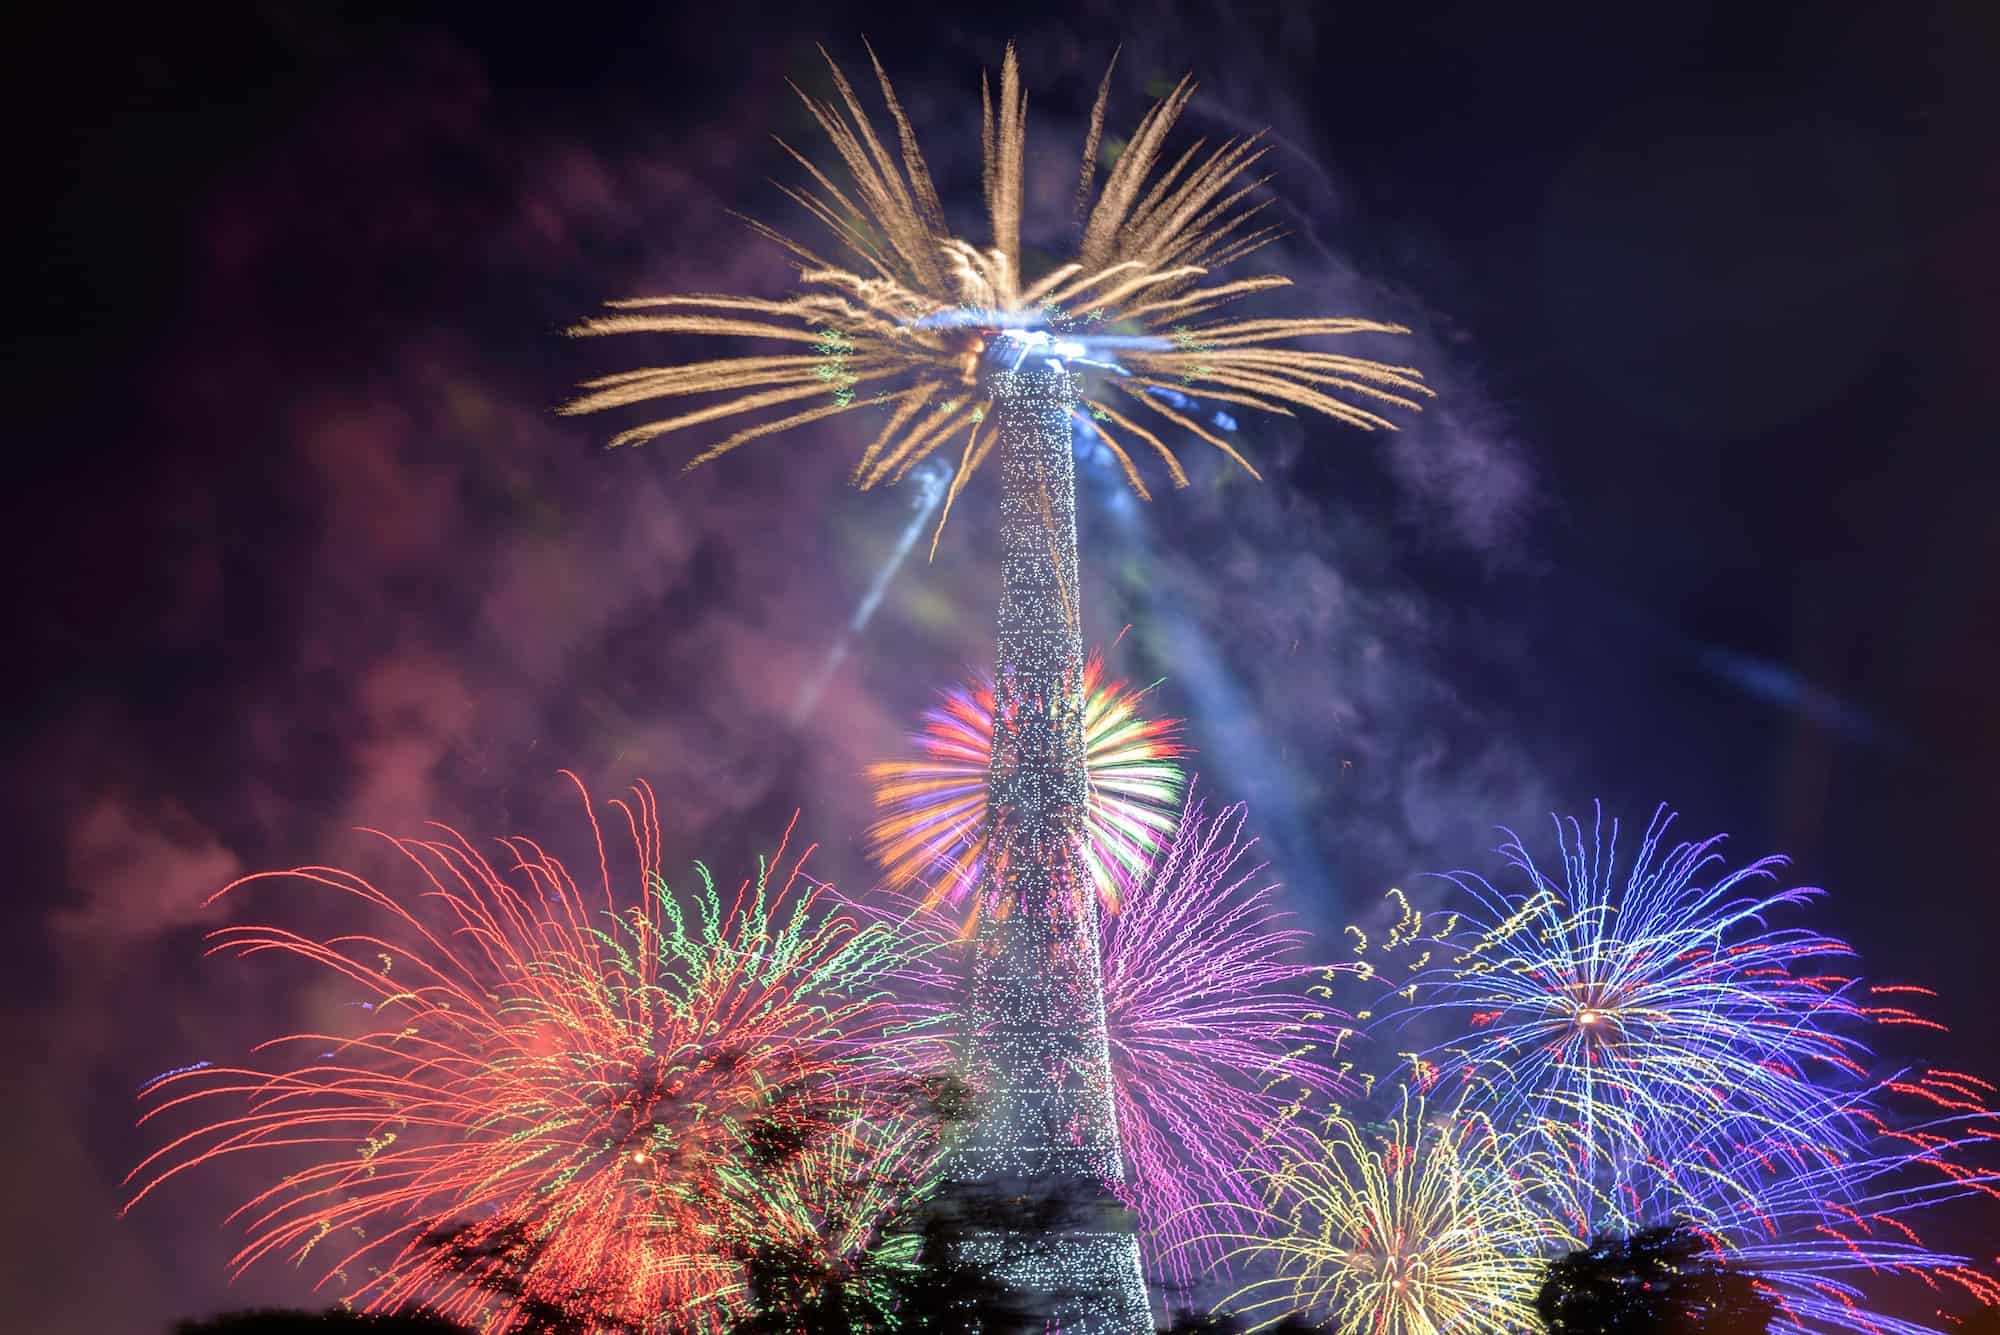 HiP Paris Blog rounds up what's on in Paris this July like Bastille Day fireworks at the Eiffel Tower.